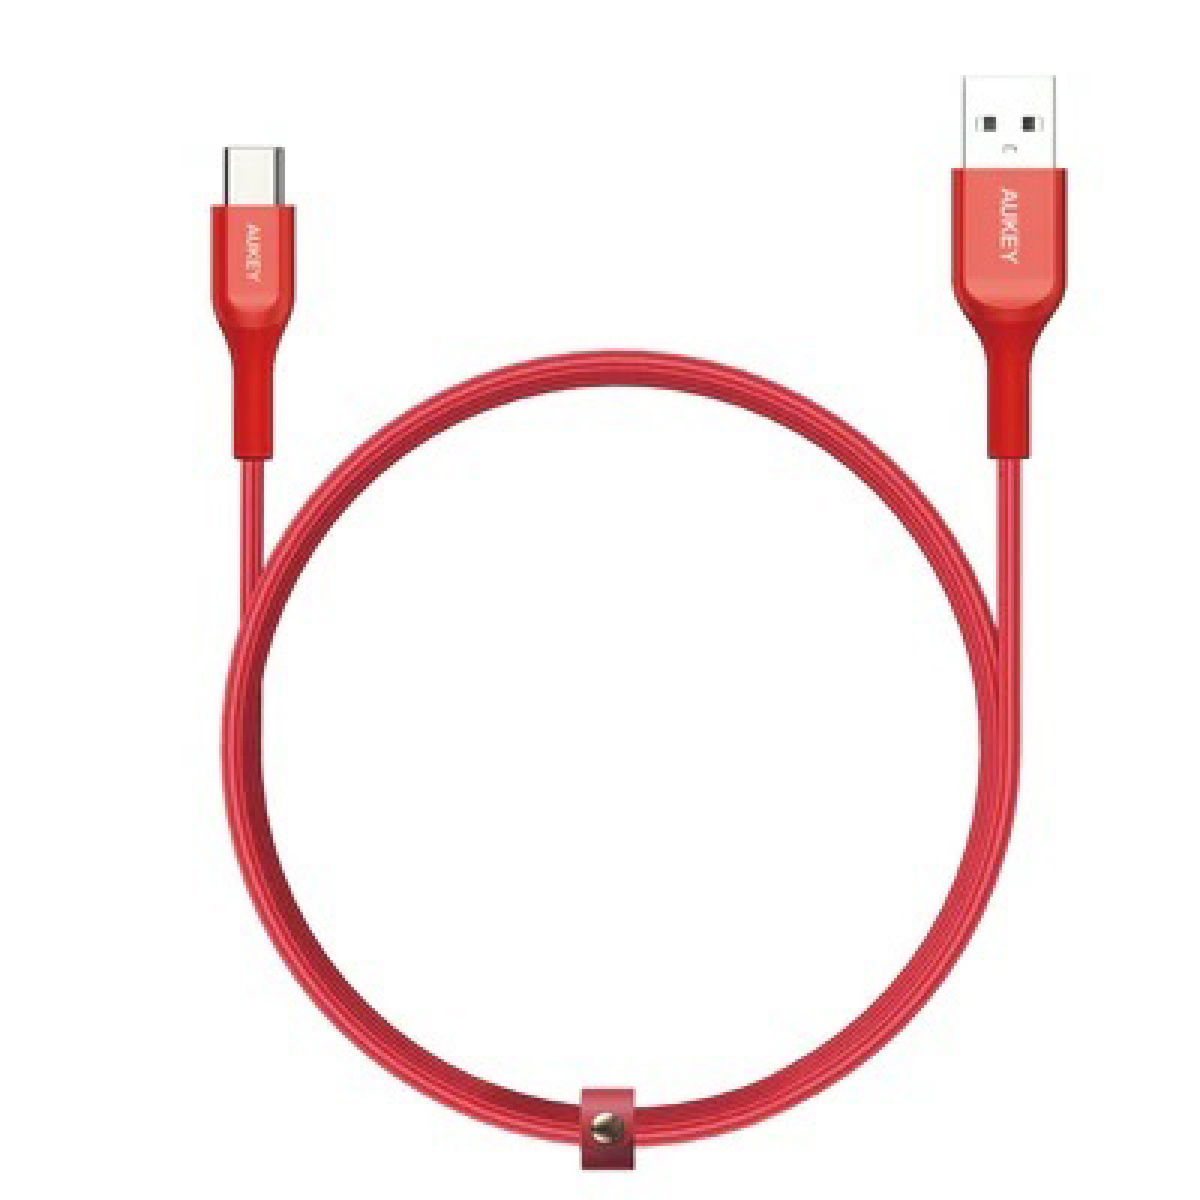 Aukey CB-AKC2 USB A To USB C Quick Charge 3.0 Kevlar Cable - 2M(Assorted Colors)